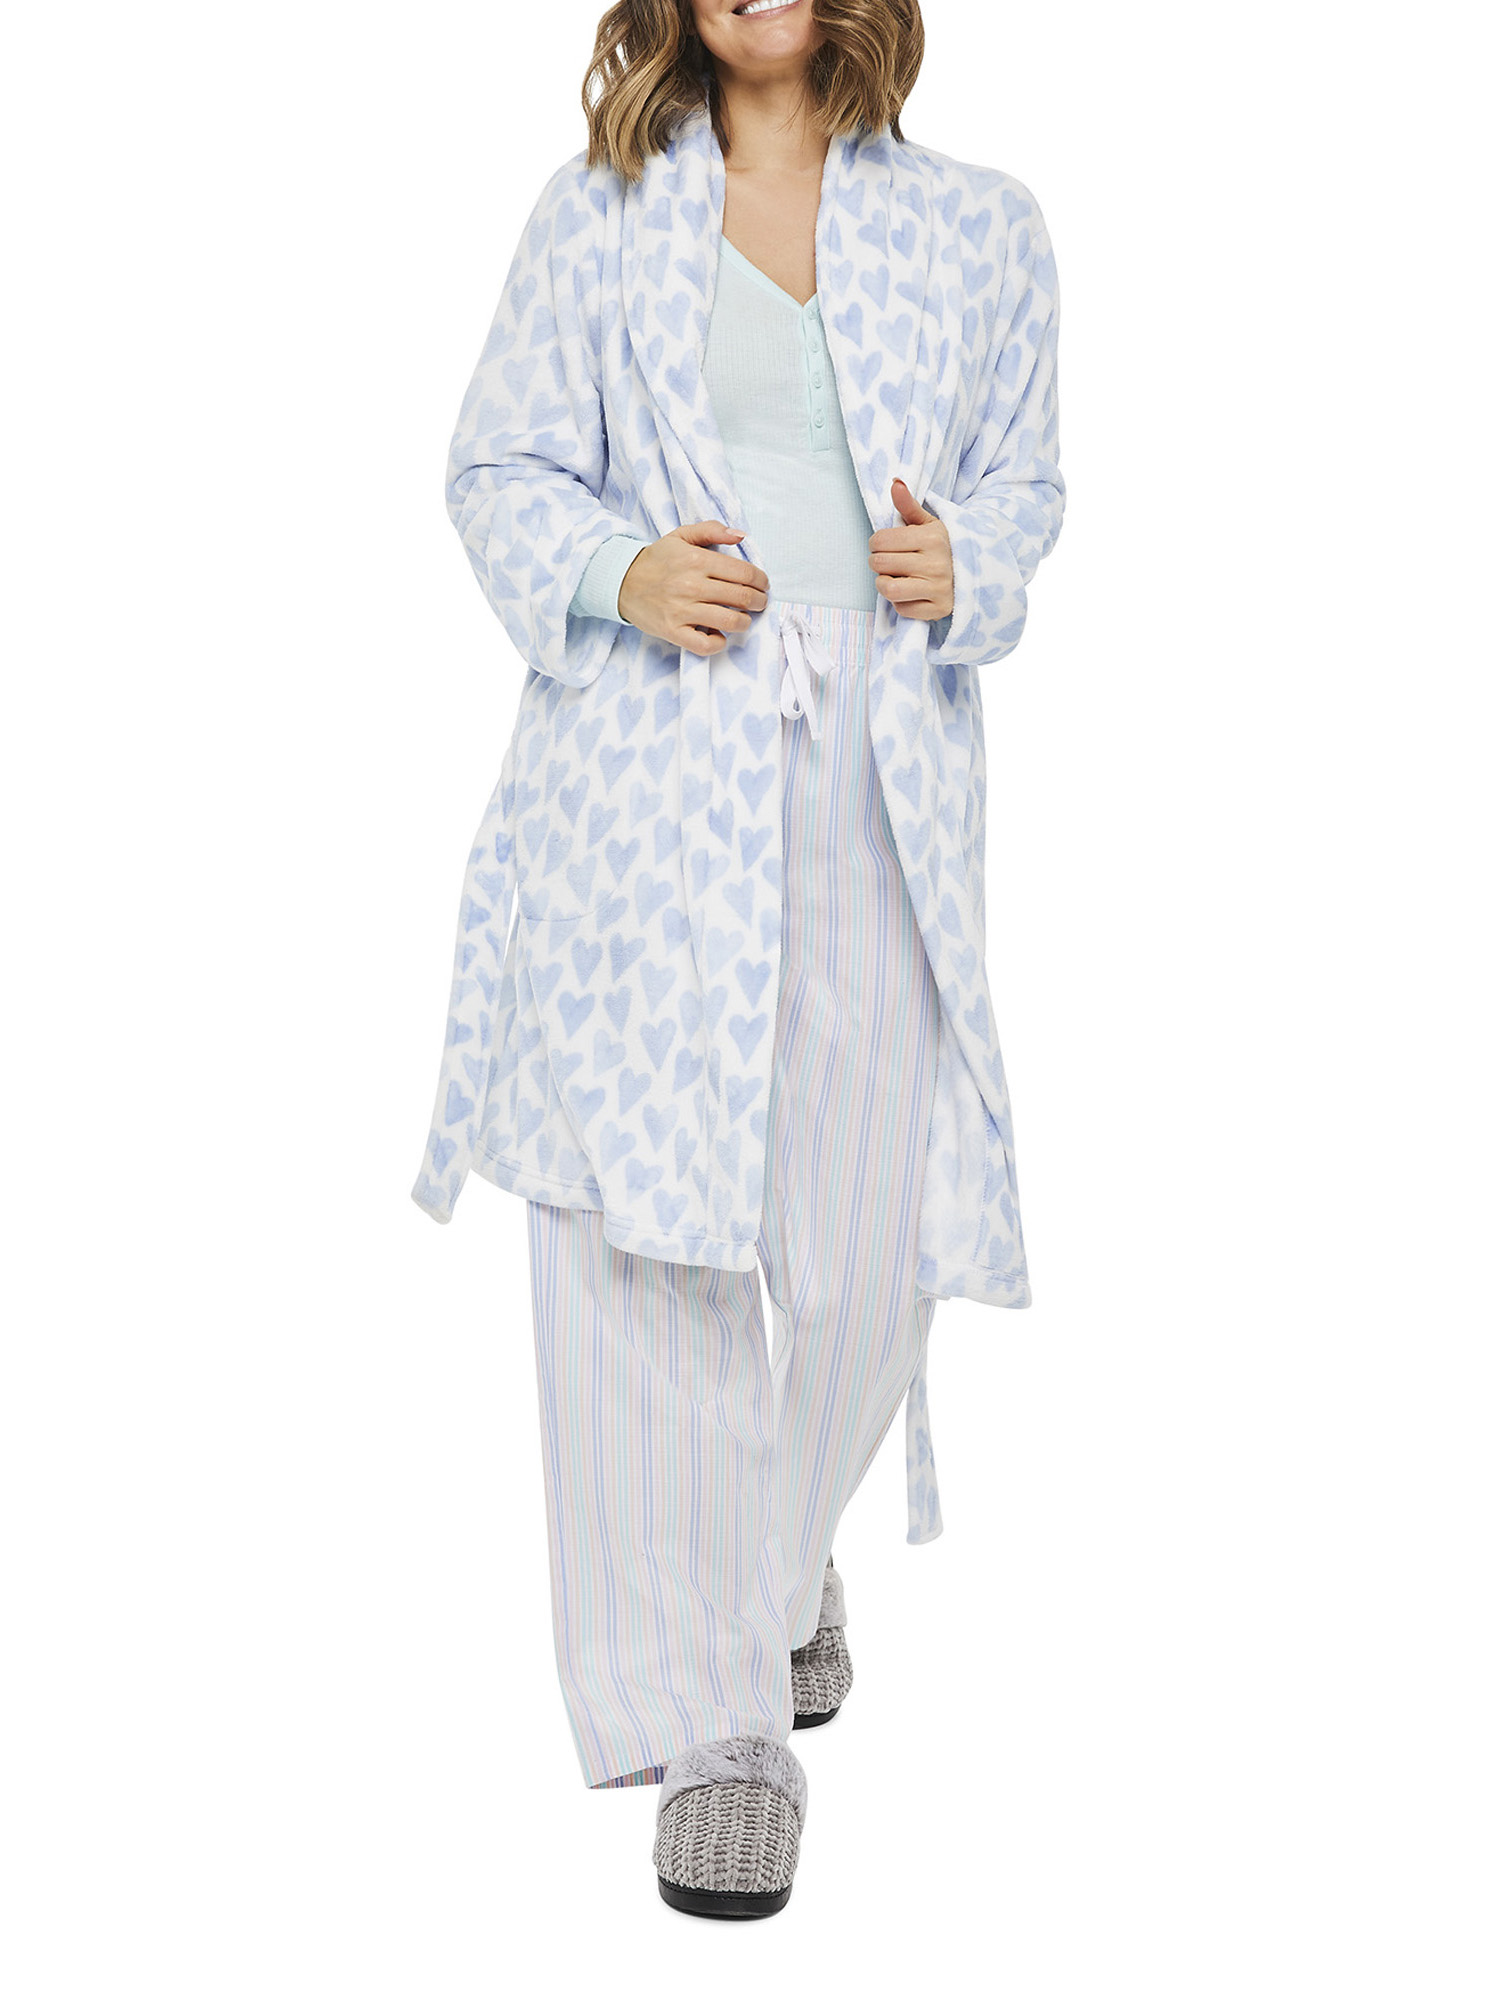 GEORGE Hearts Afternoon Polyester Robe (Women's or Women's Plus) 1 Pack - image 2 of 7